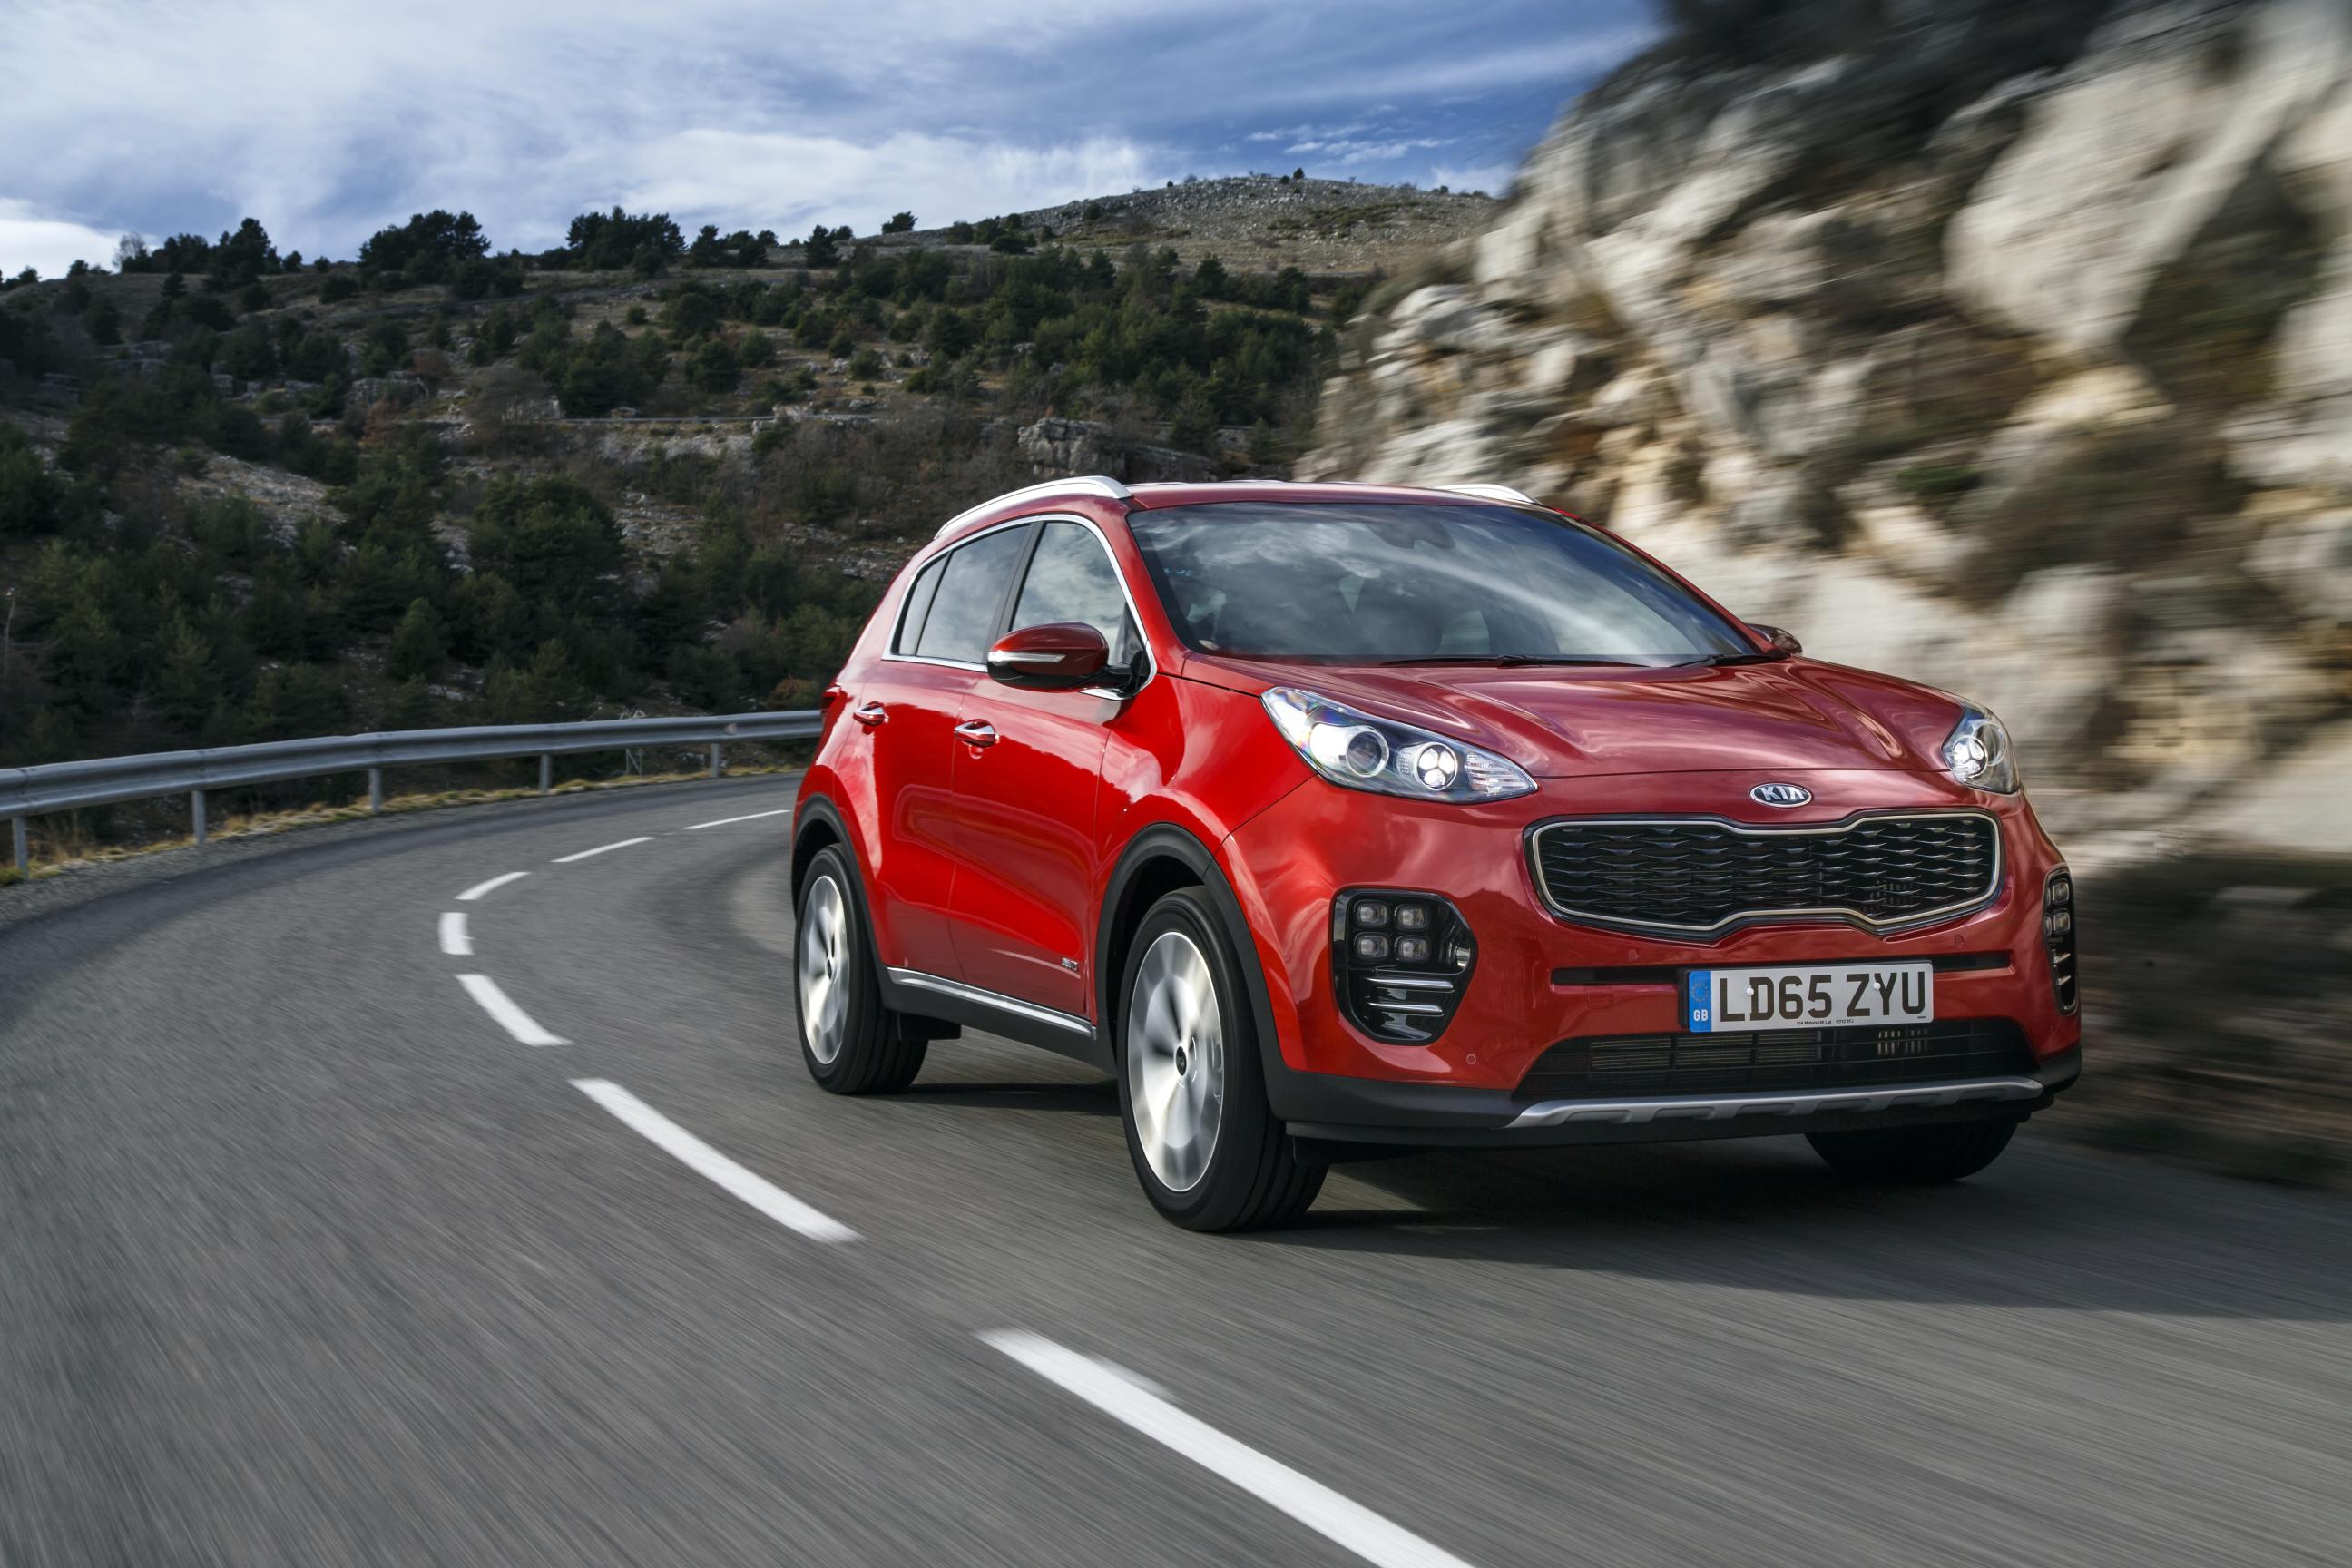 Red Kia Sportage driving towards the right on a mountain road